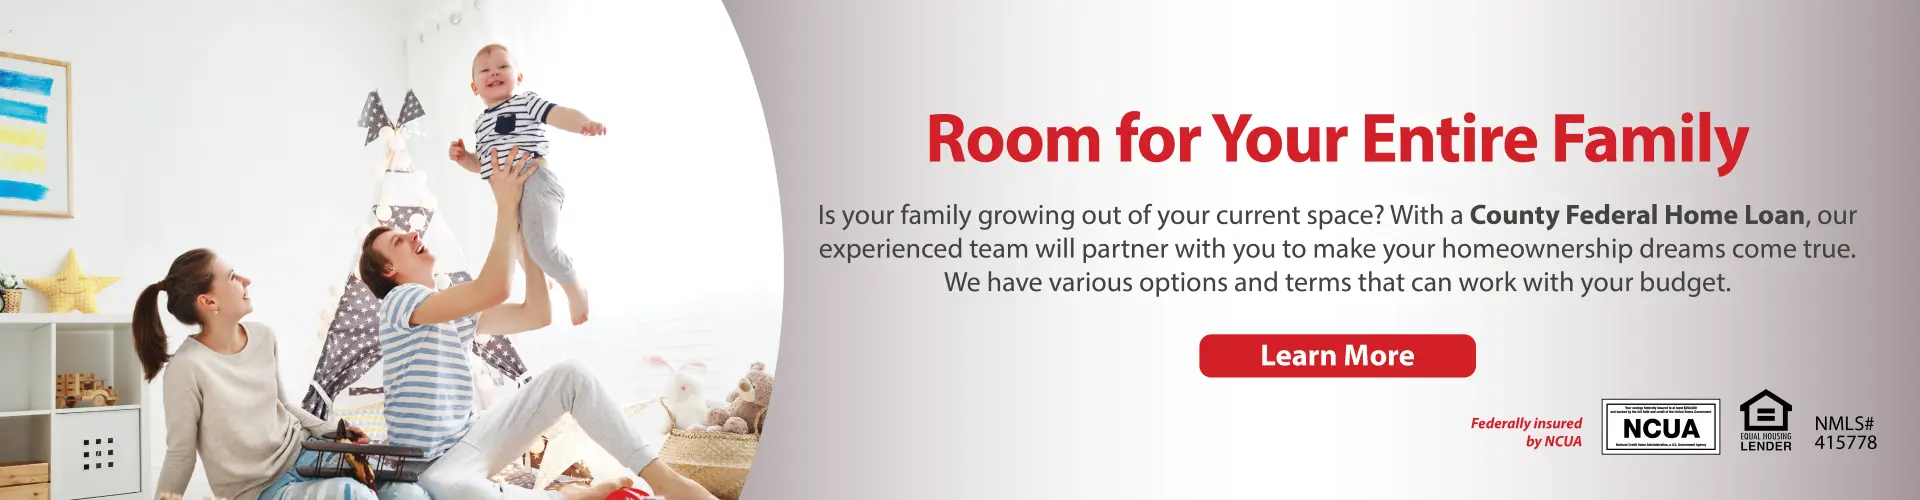 Room for Your Entire Family